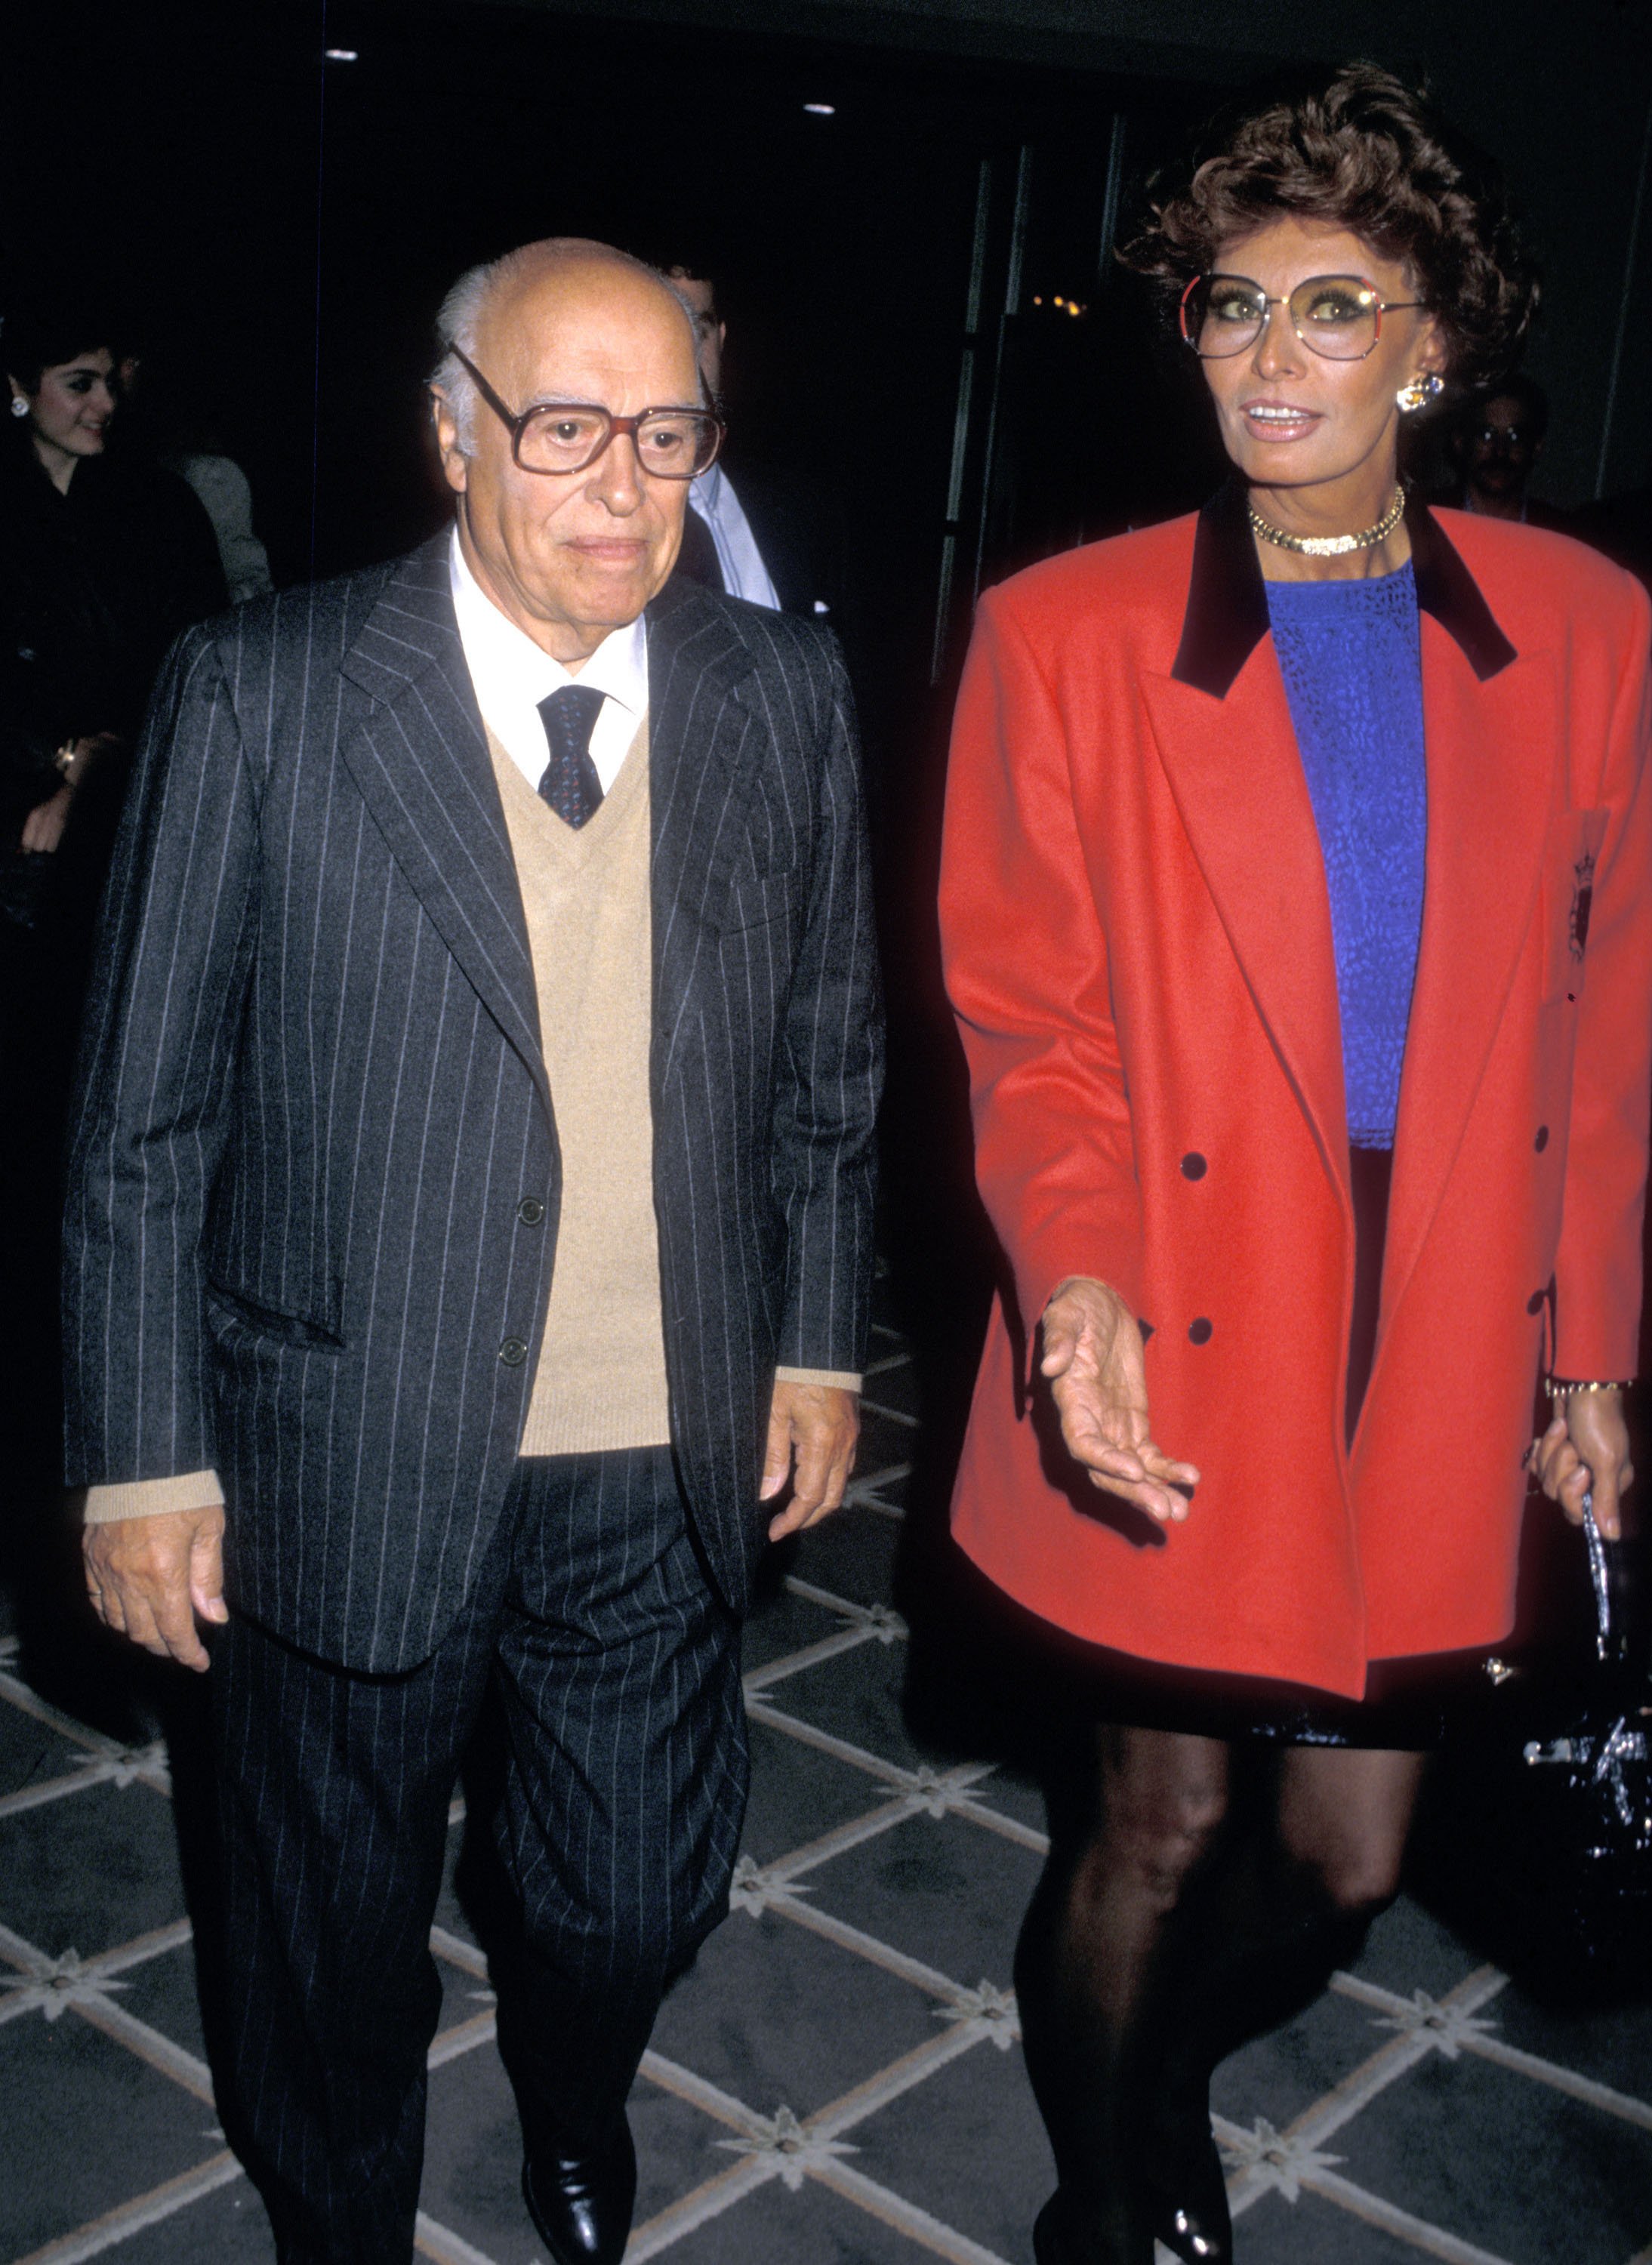 Actress Sophia Loren and husband producer Carlo Ponti at the NBC Television Affiliates Party on January 5, 1988 in Los Angeles, California. | Source: Getty Images